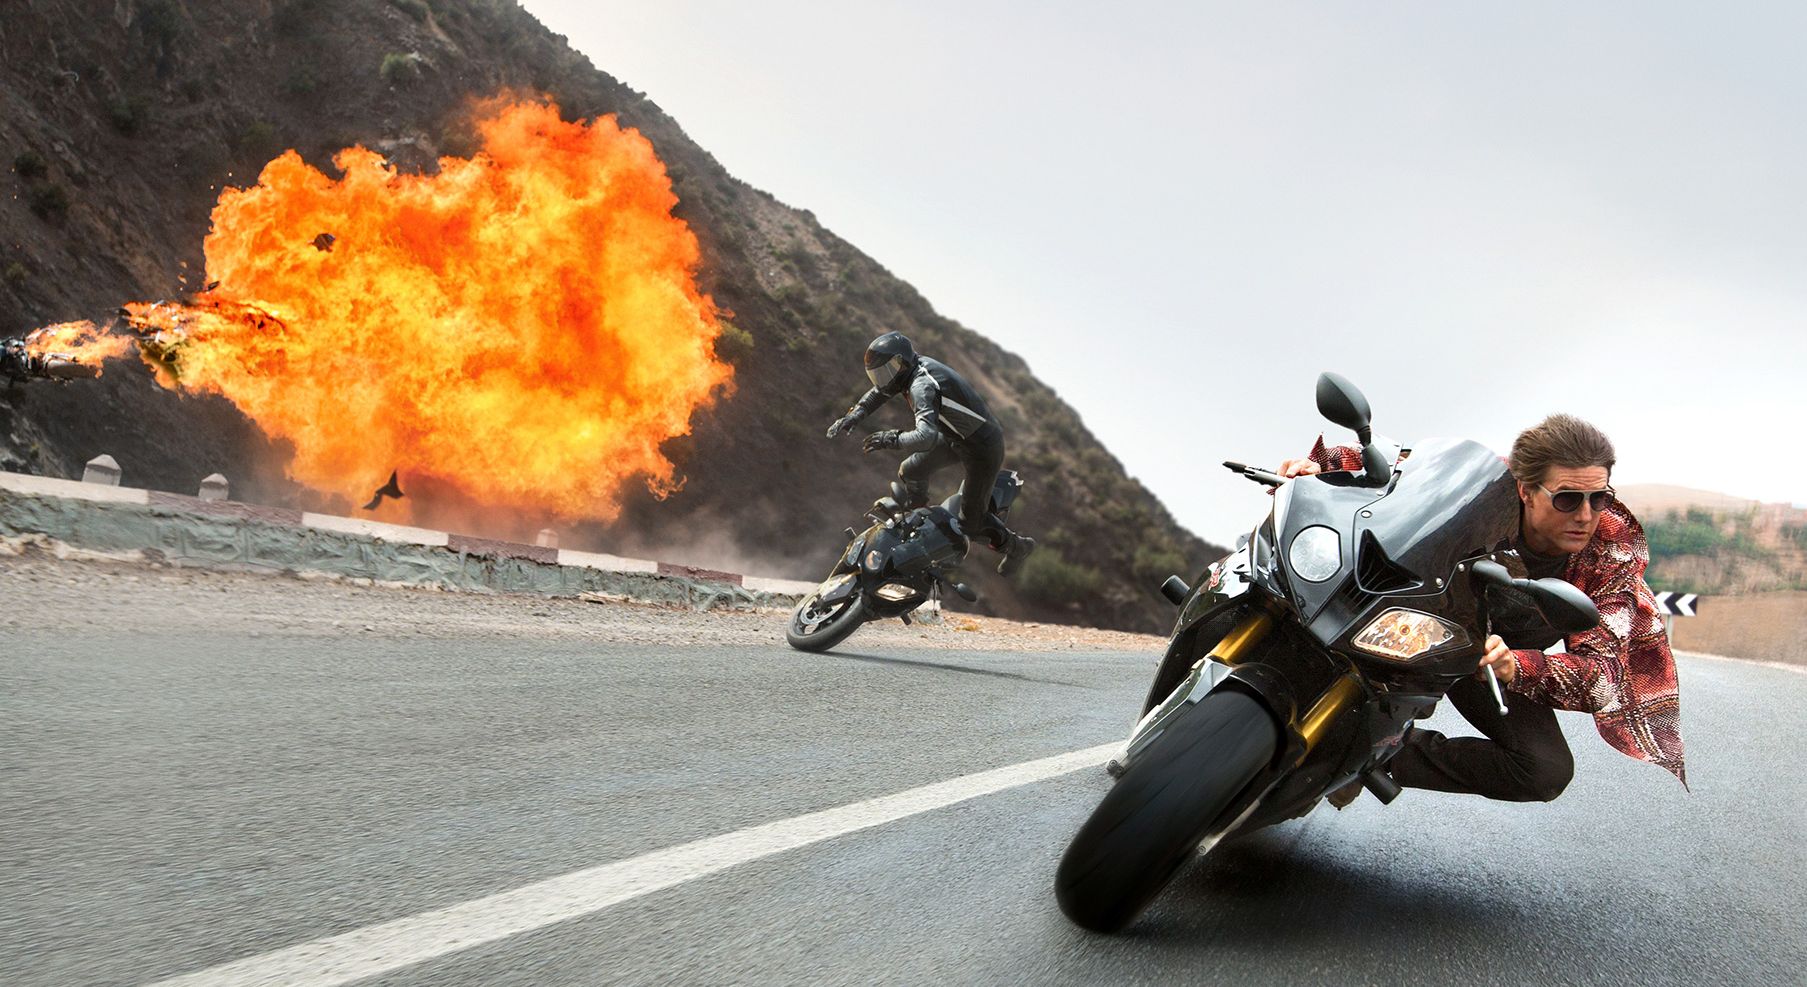 Tom Cruise Motorcycle Action